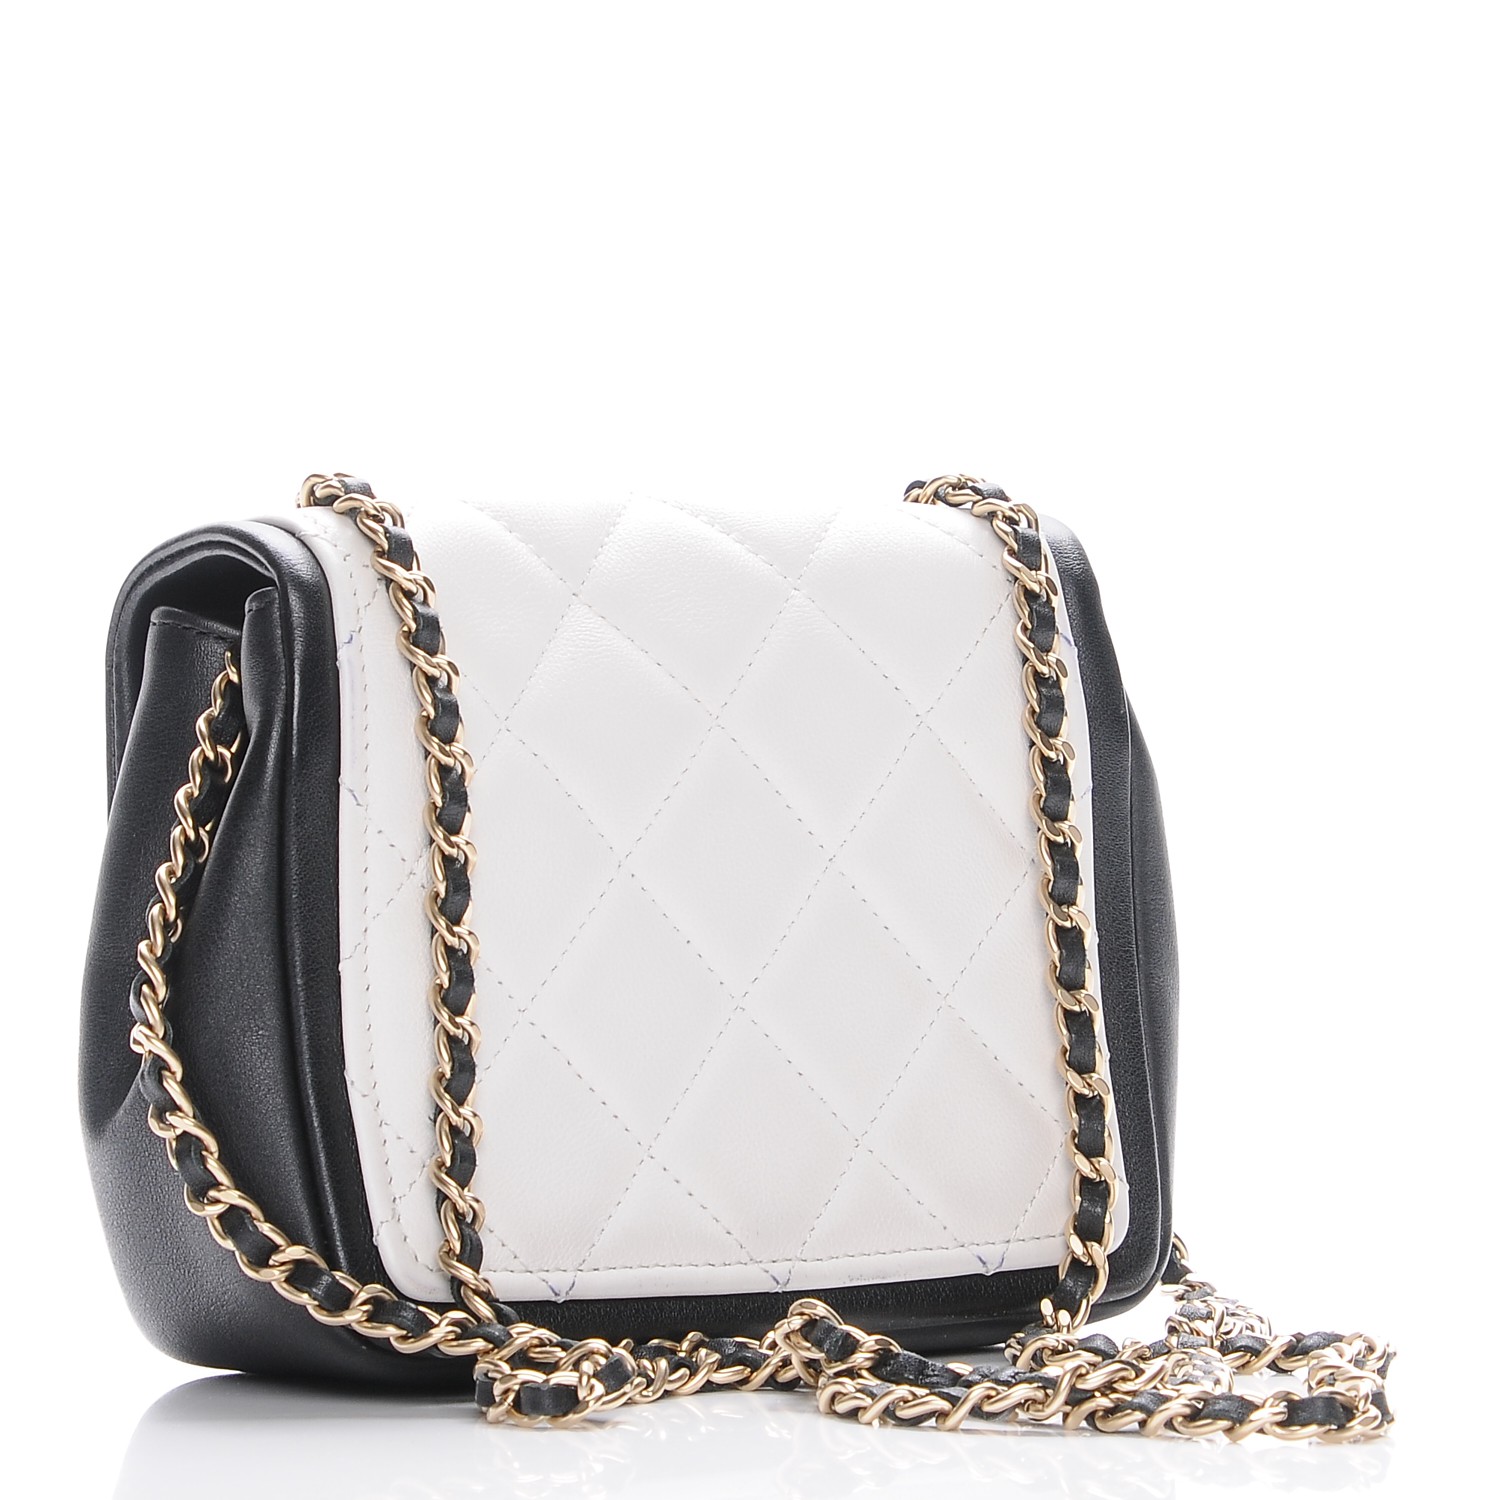 CHANEL Lambskin Quilted Graphic Mini Flap Bag White Black 220517